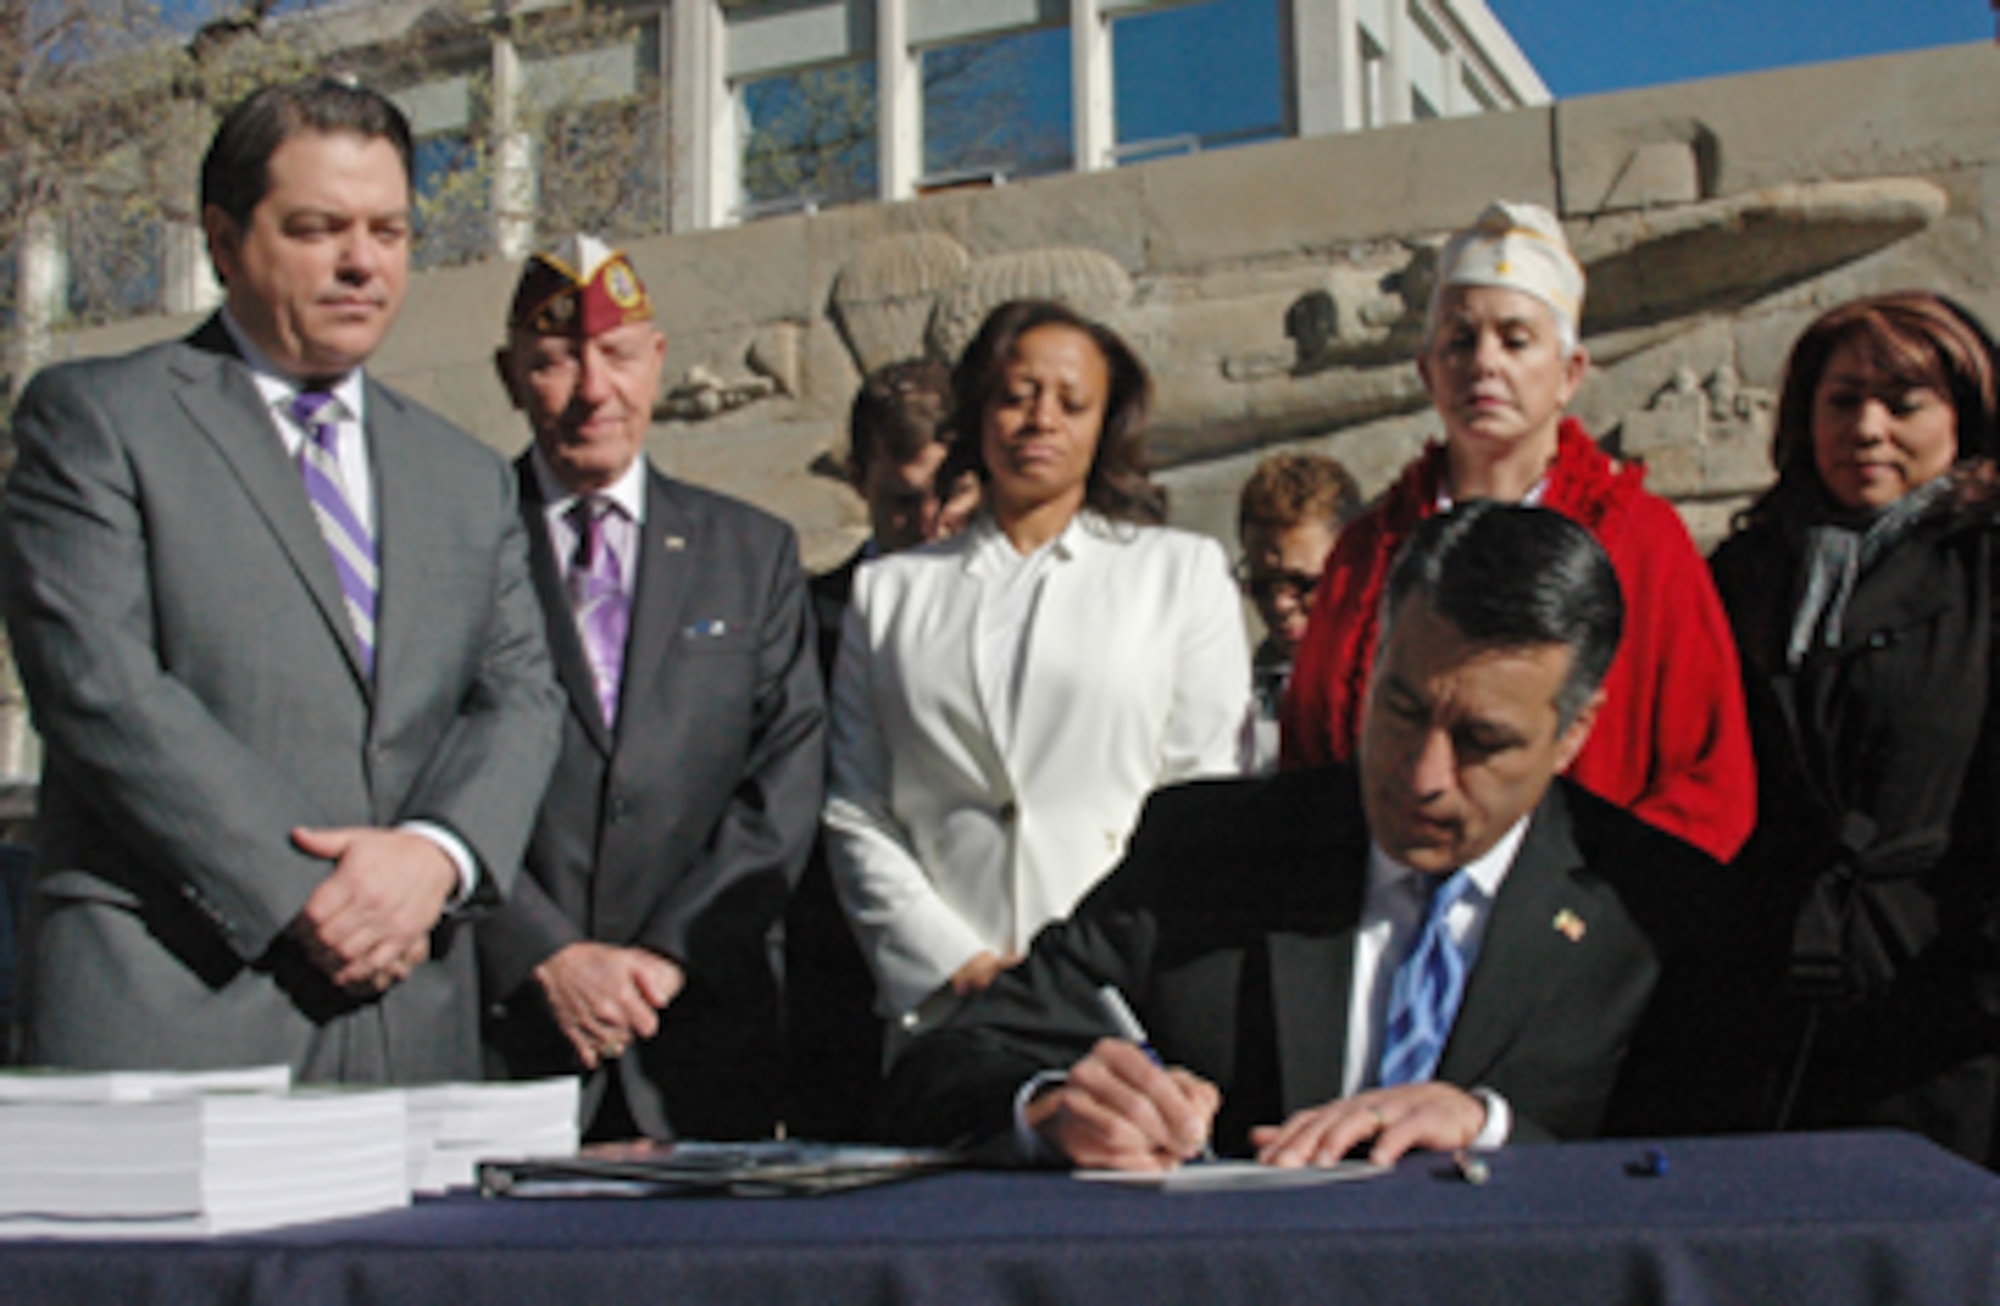 Nevada Gov. Brian Sandoval signs Assembly Bill 76 into law Thursday during the annual Veterans and Military Day at the Legislature here at the Nevada Capitol. The law extends the length of time a Veteran with an honorable discharge can receive a tuition waiver from a Nevada state higher-education school from two to five years.

Photo by Sgt. 1st Class Erick Studenicka, NV ARNG (released)
